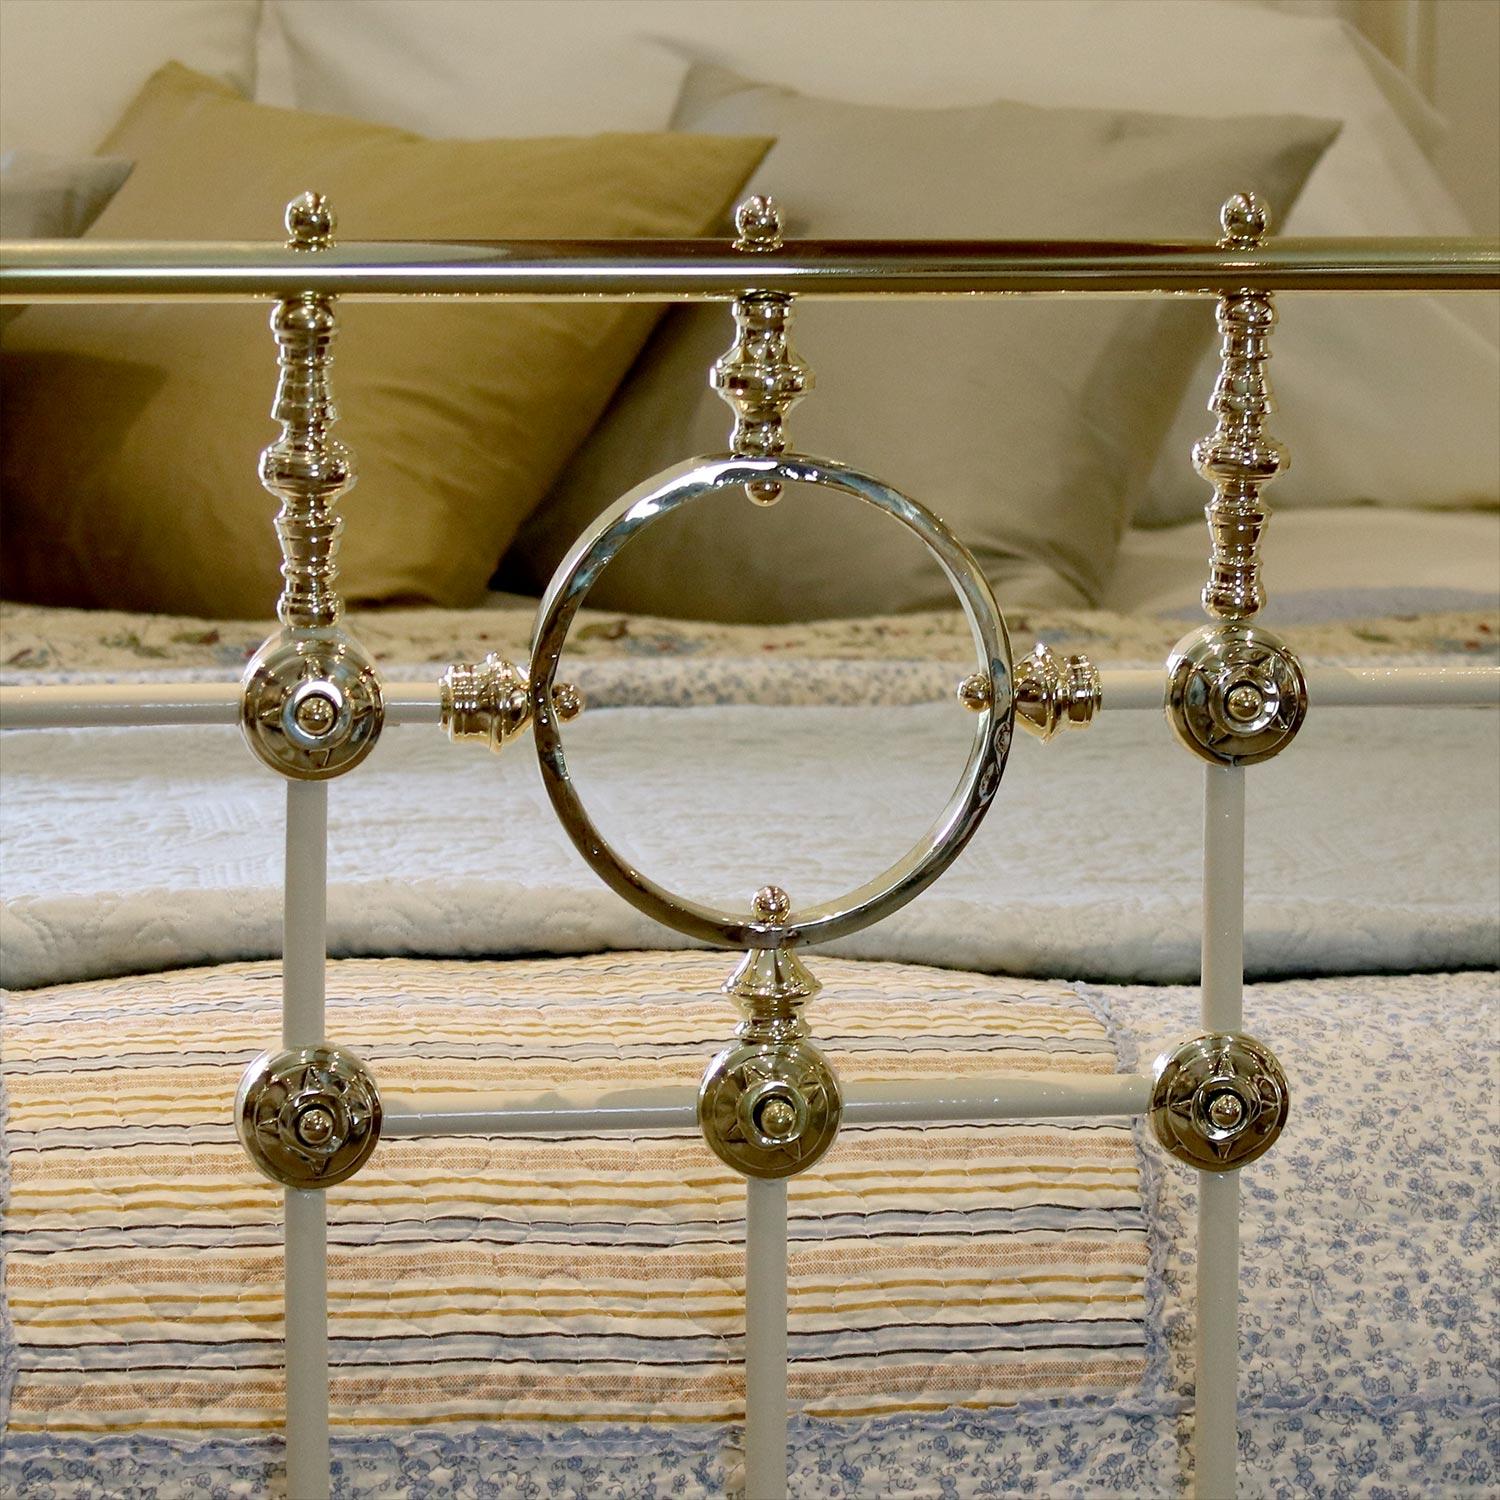 Cast Decorative Brass and Iron Bed, MK149